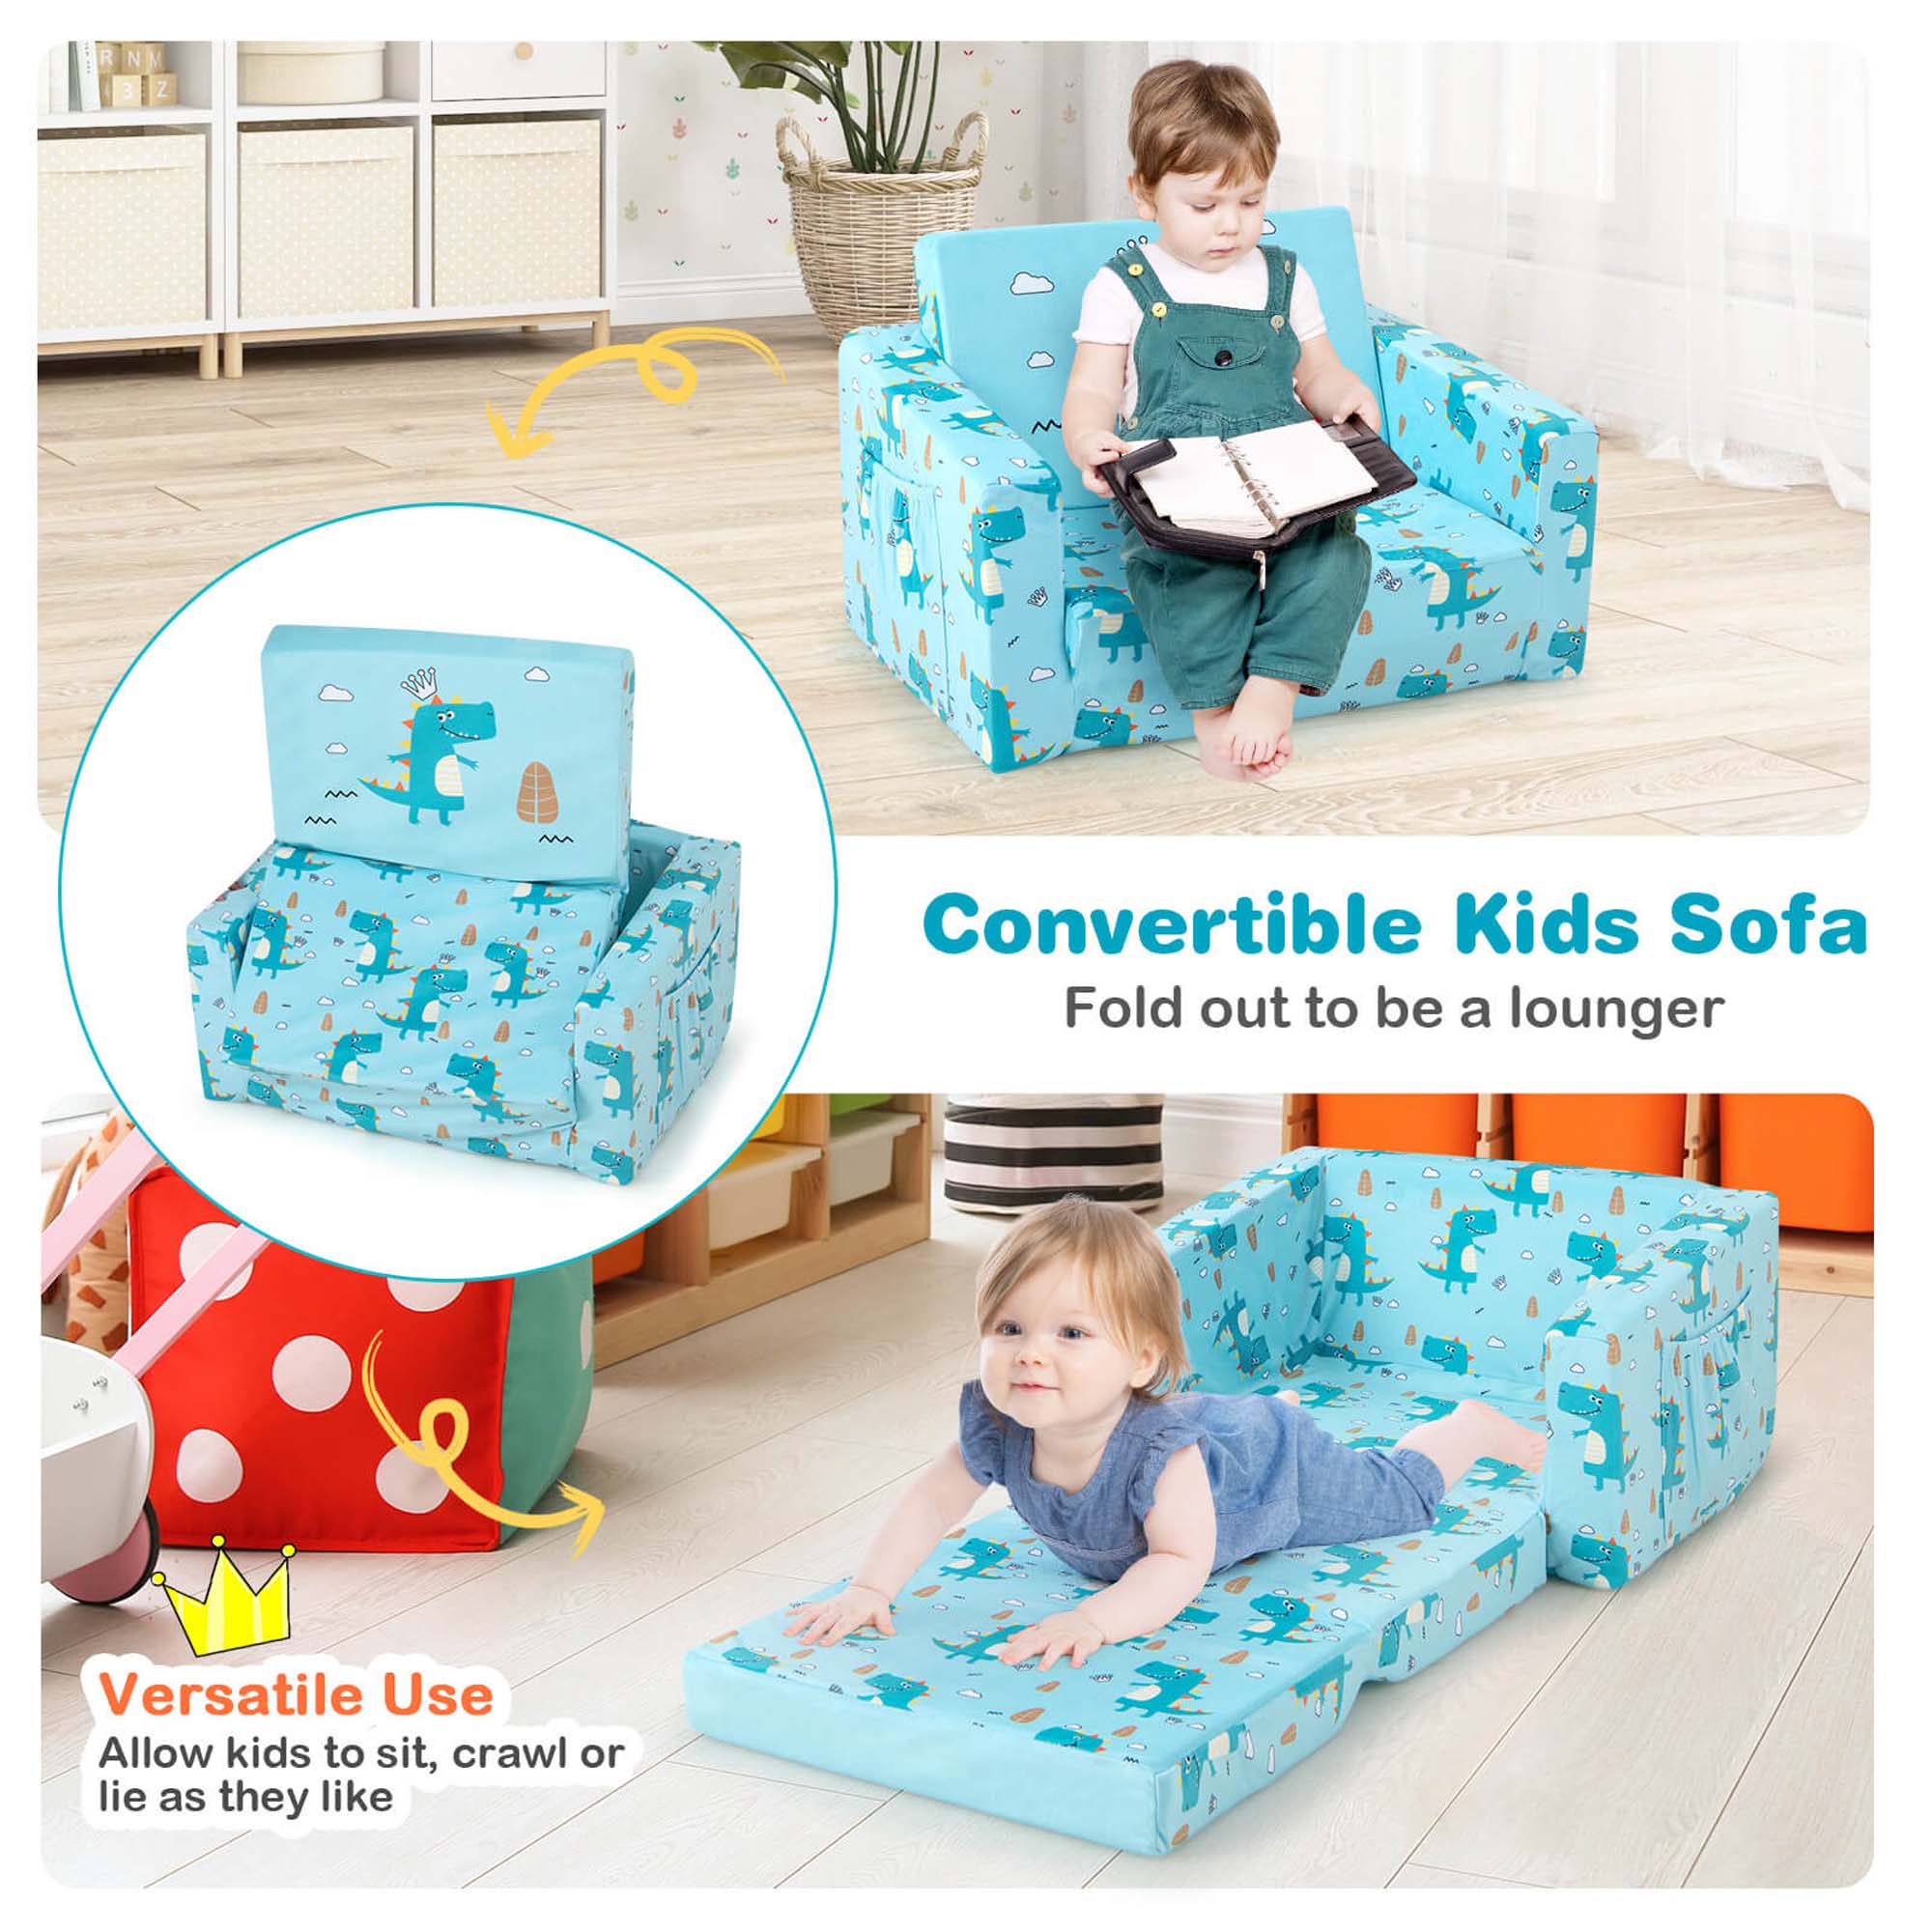 Costway 2-in-1 Convertible Kids Sofa Children Flip-Out Lounger Couch Upholstered Sleeper